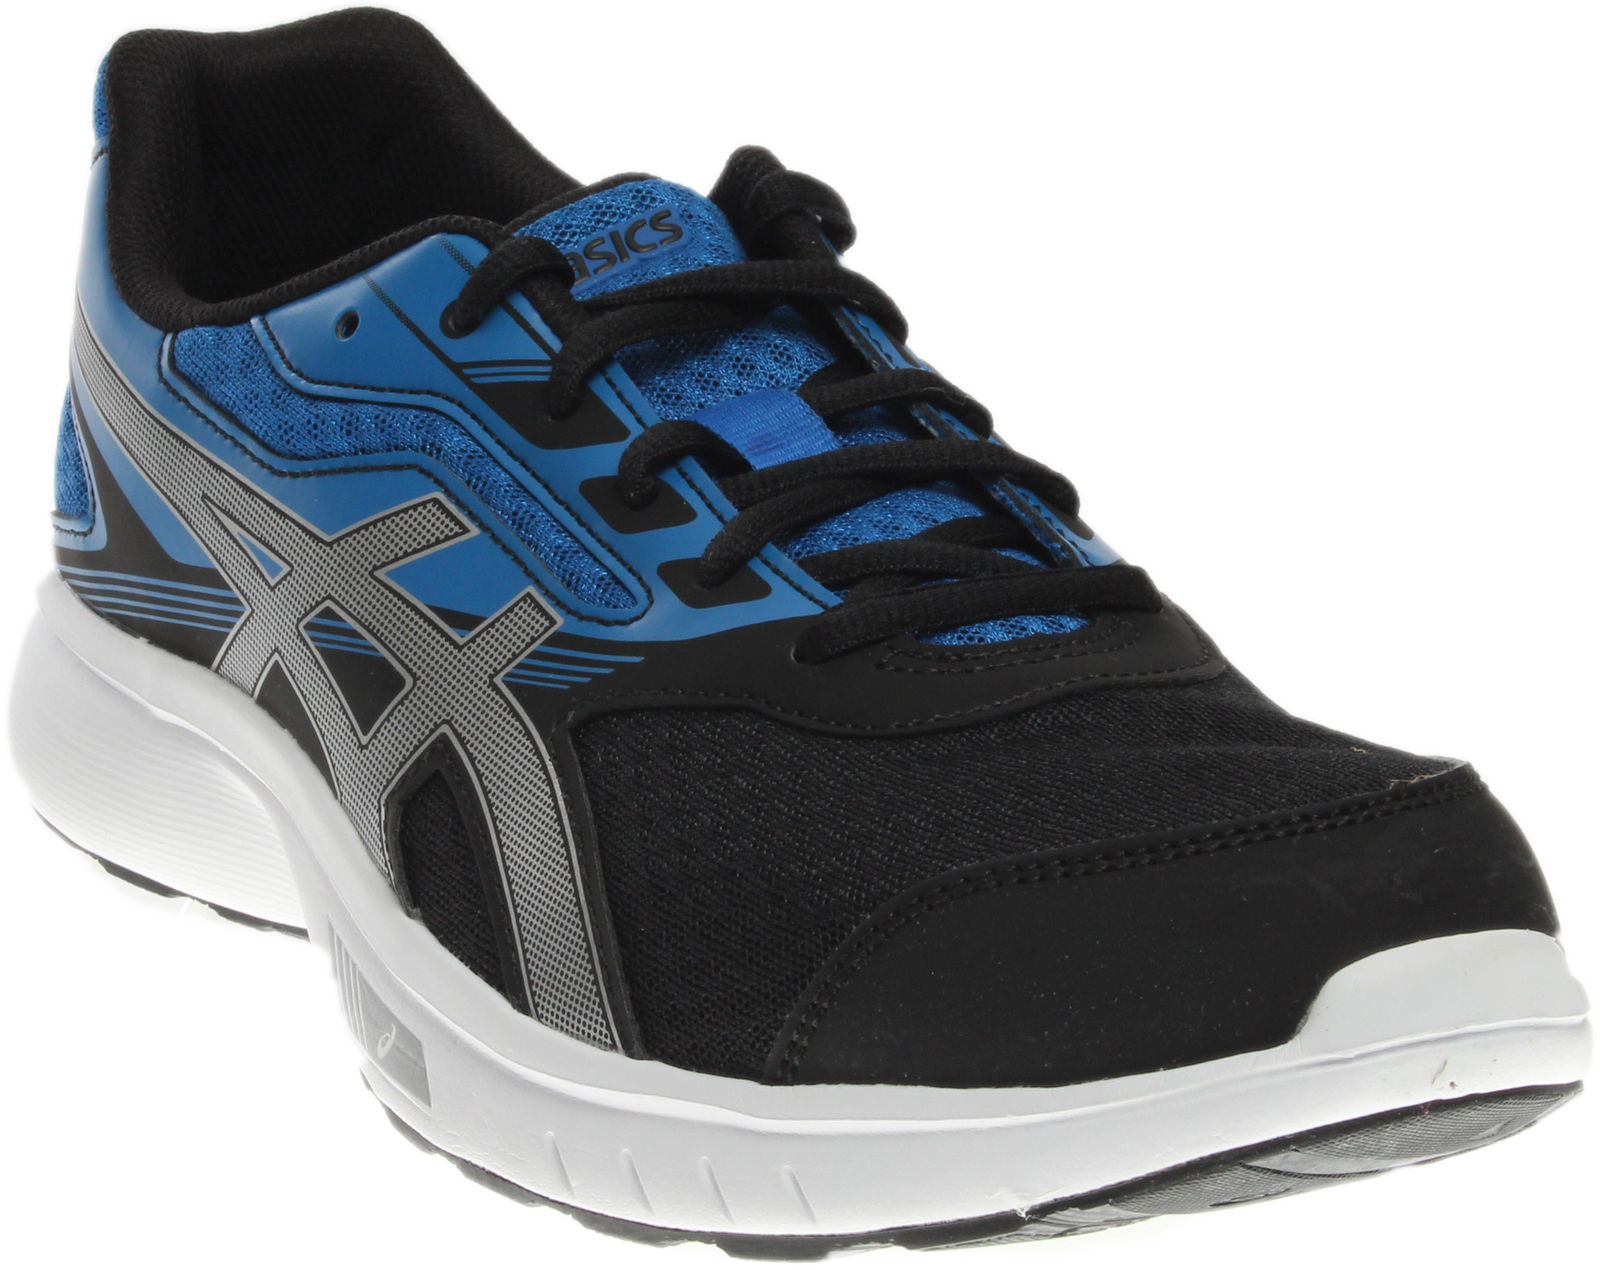 ASICS Stormer men’s athletic shoes for $29, free shipping